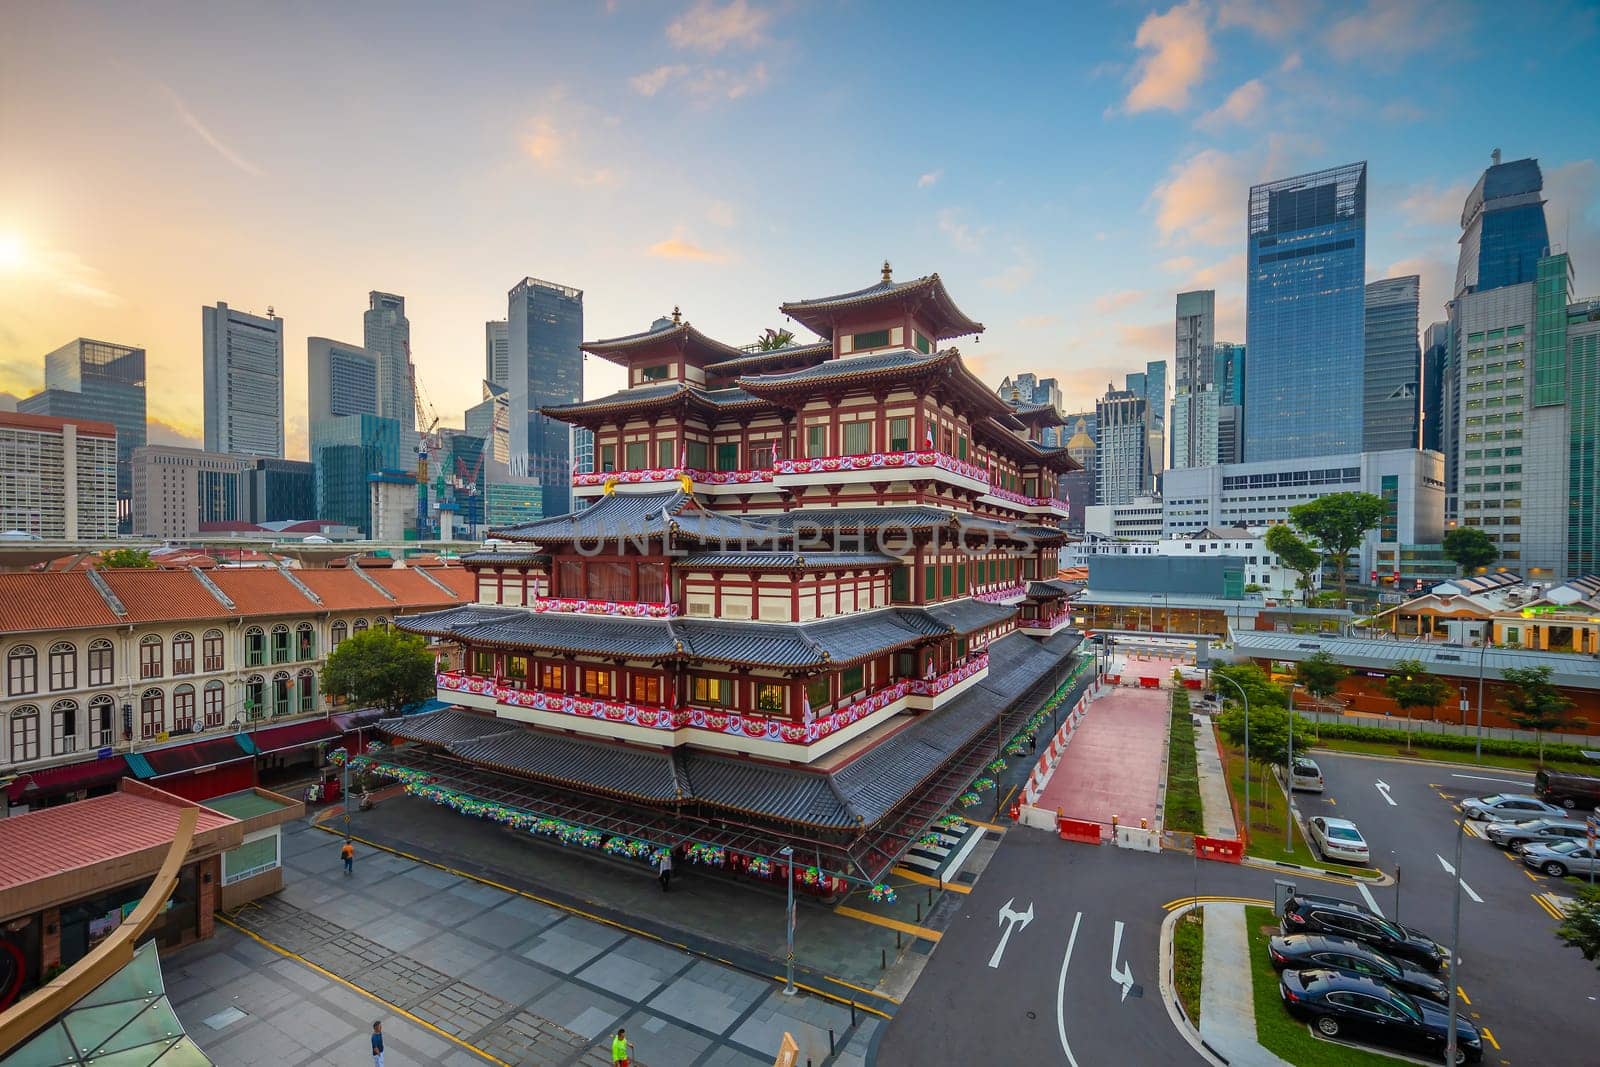 Buddha Toothe Relic Temple at Chinatown  Singapore by f11photo